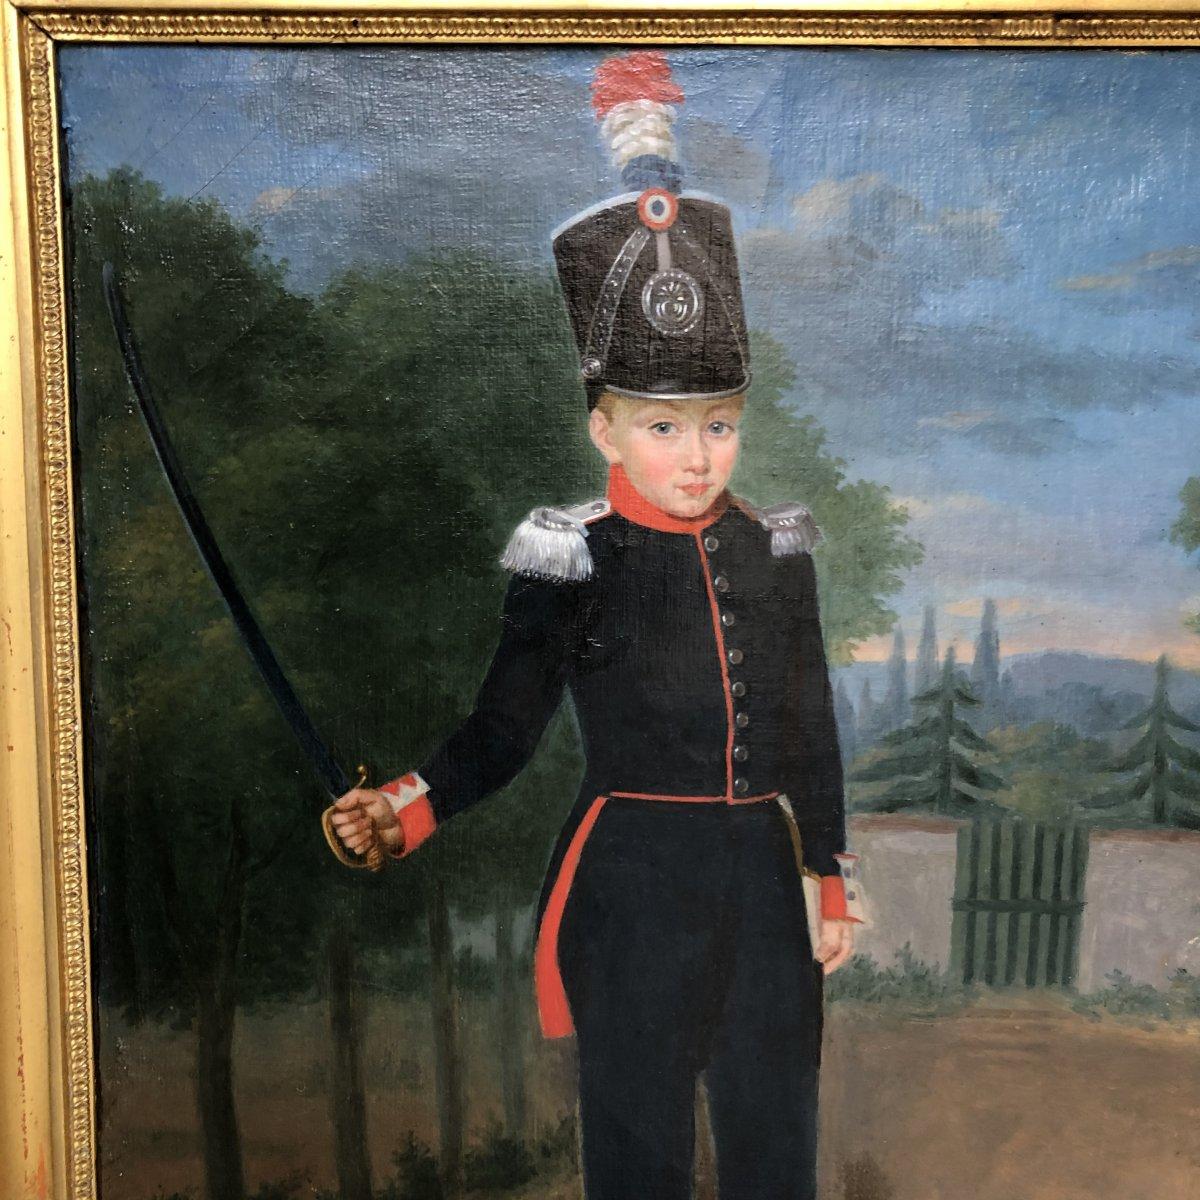 Canvas Painting of a Child in Military Costume